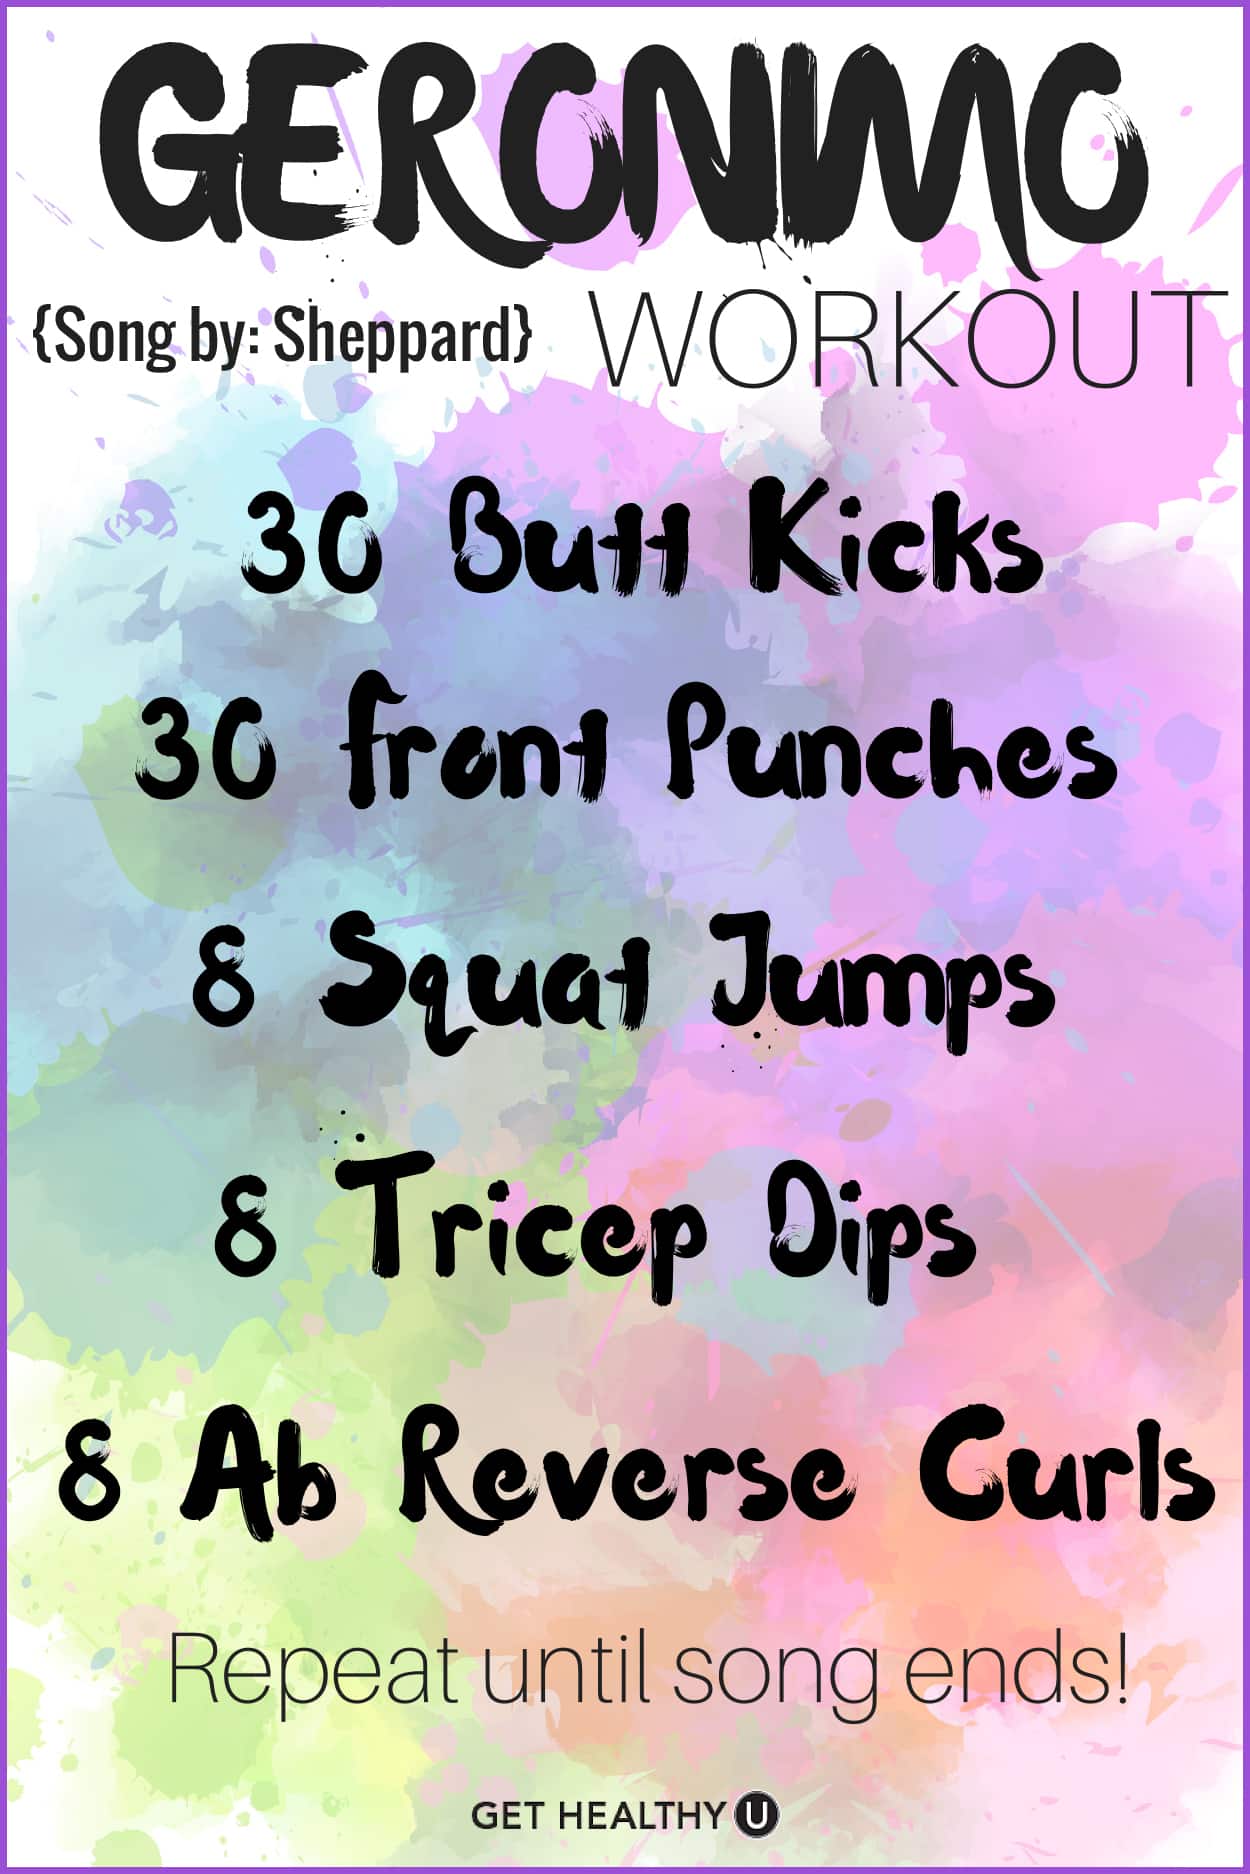 Turn up the tunes and get sweating! This is a no-equipment one song workout done to Sheppard's "Geronimo'"